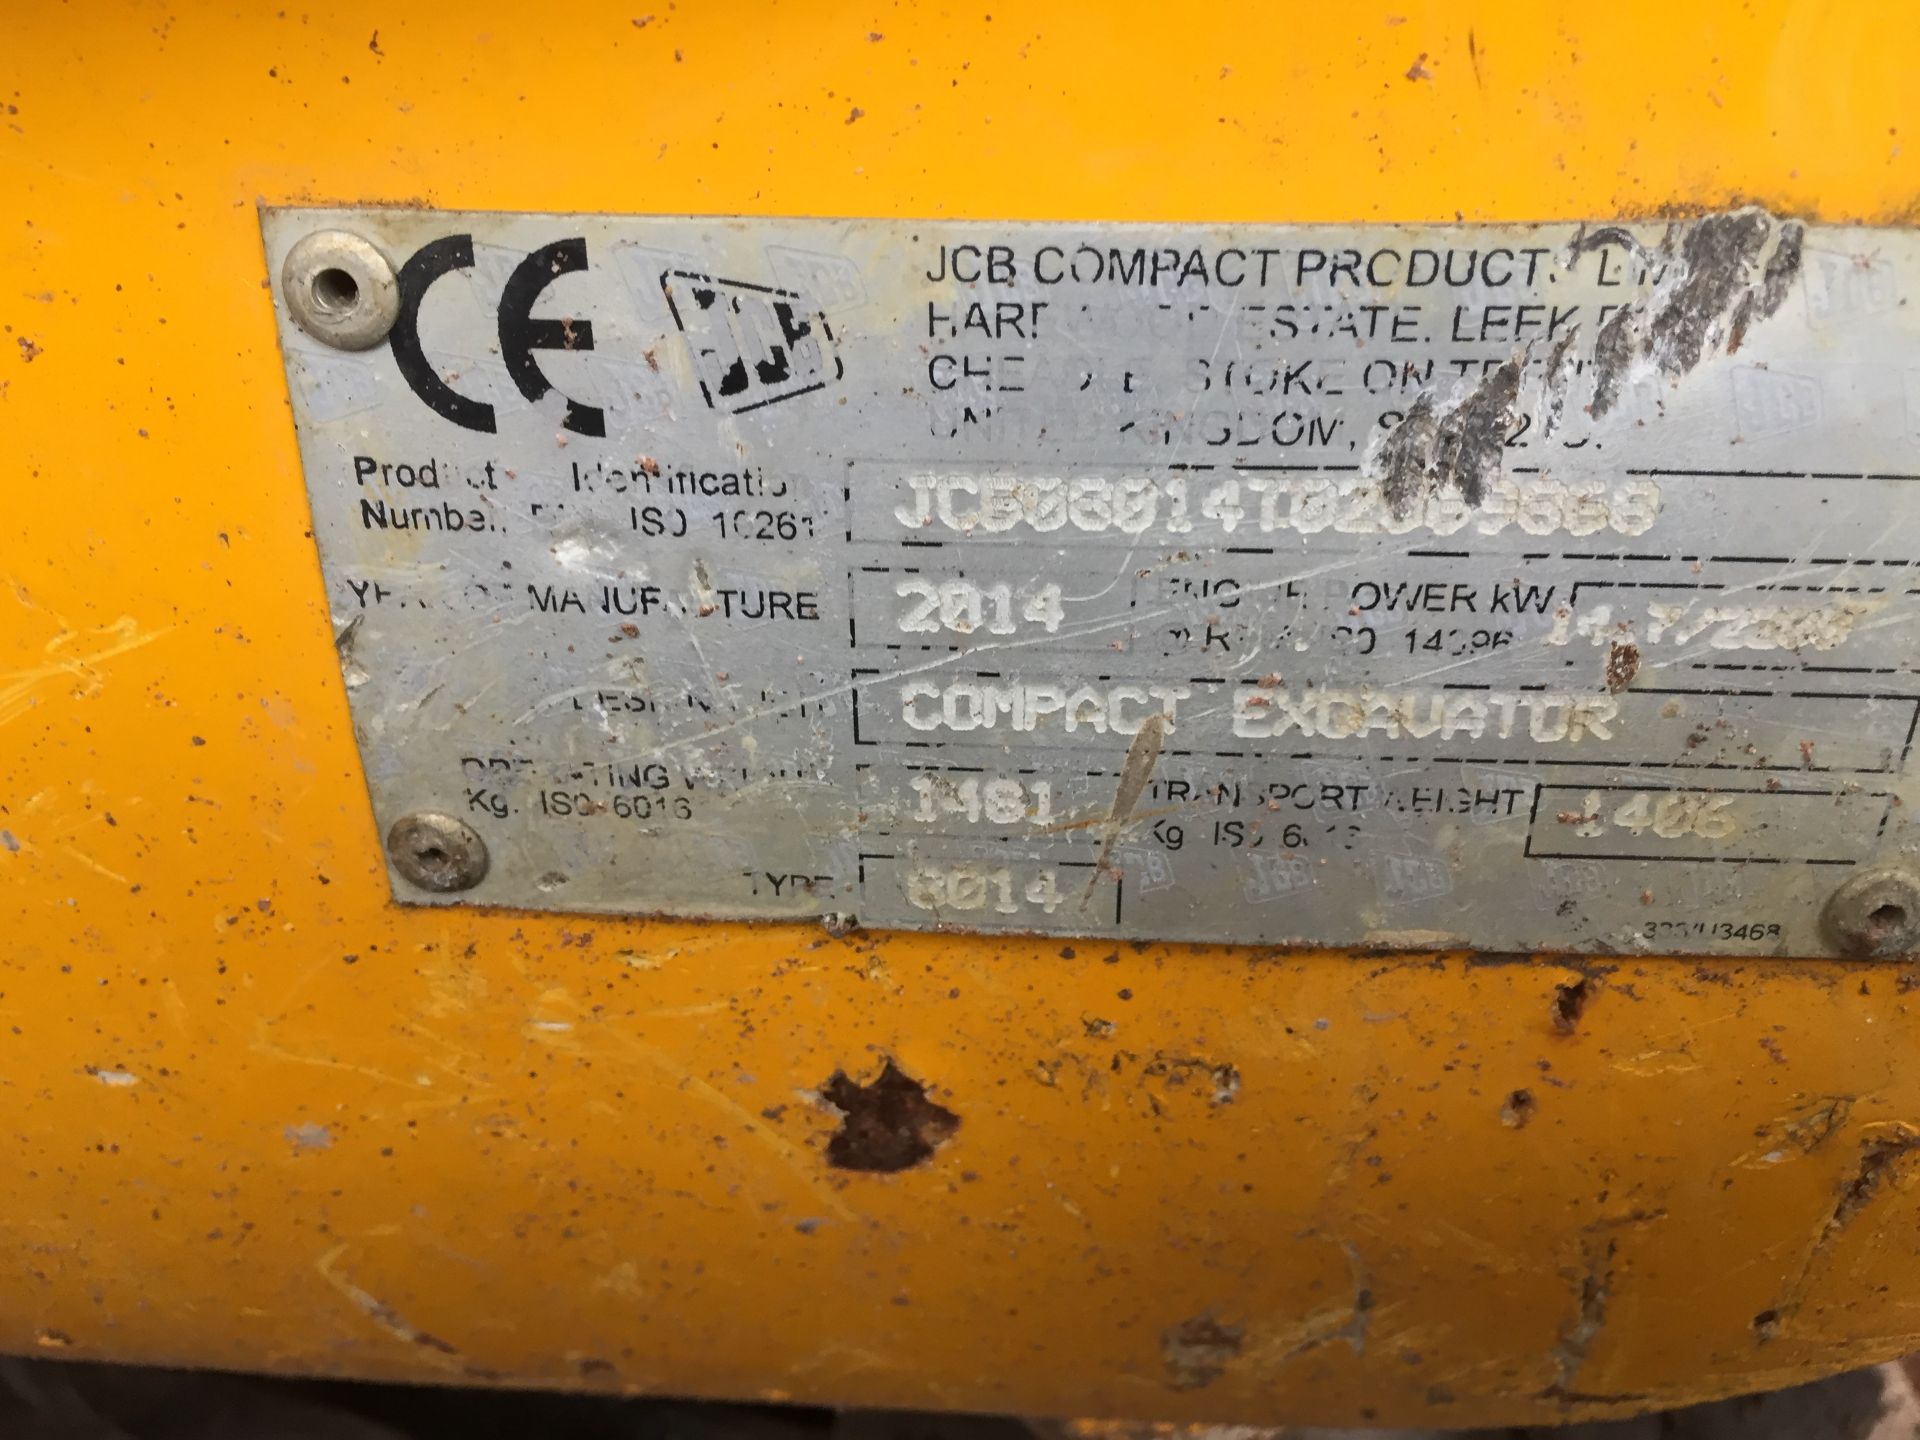 4 x 2014 8014 JCB Mini Diggers *RESERVE REDUCED* - Image 5 of 7